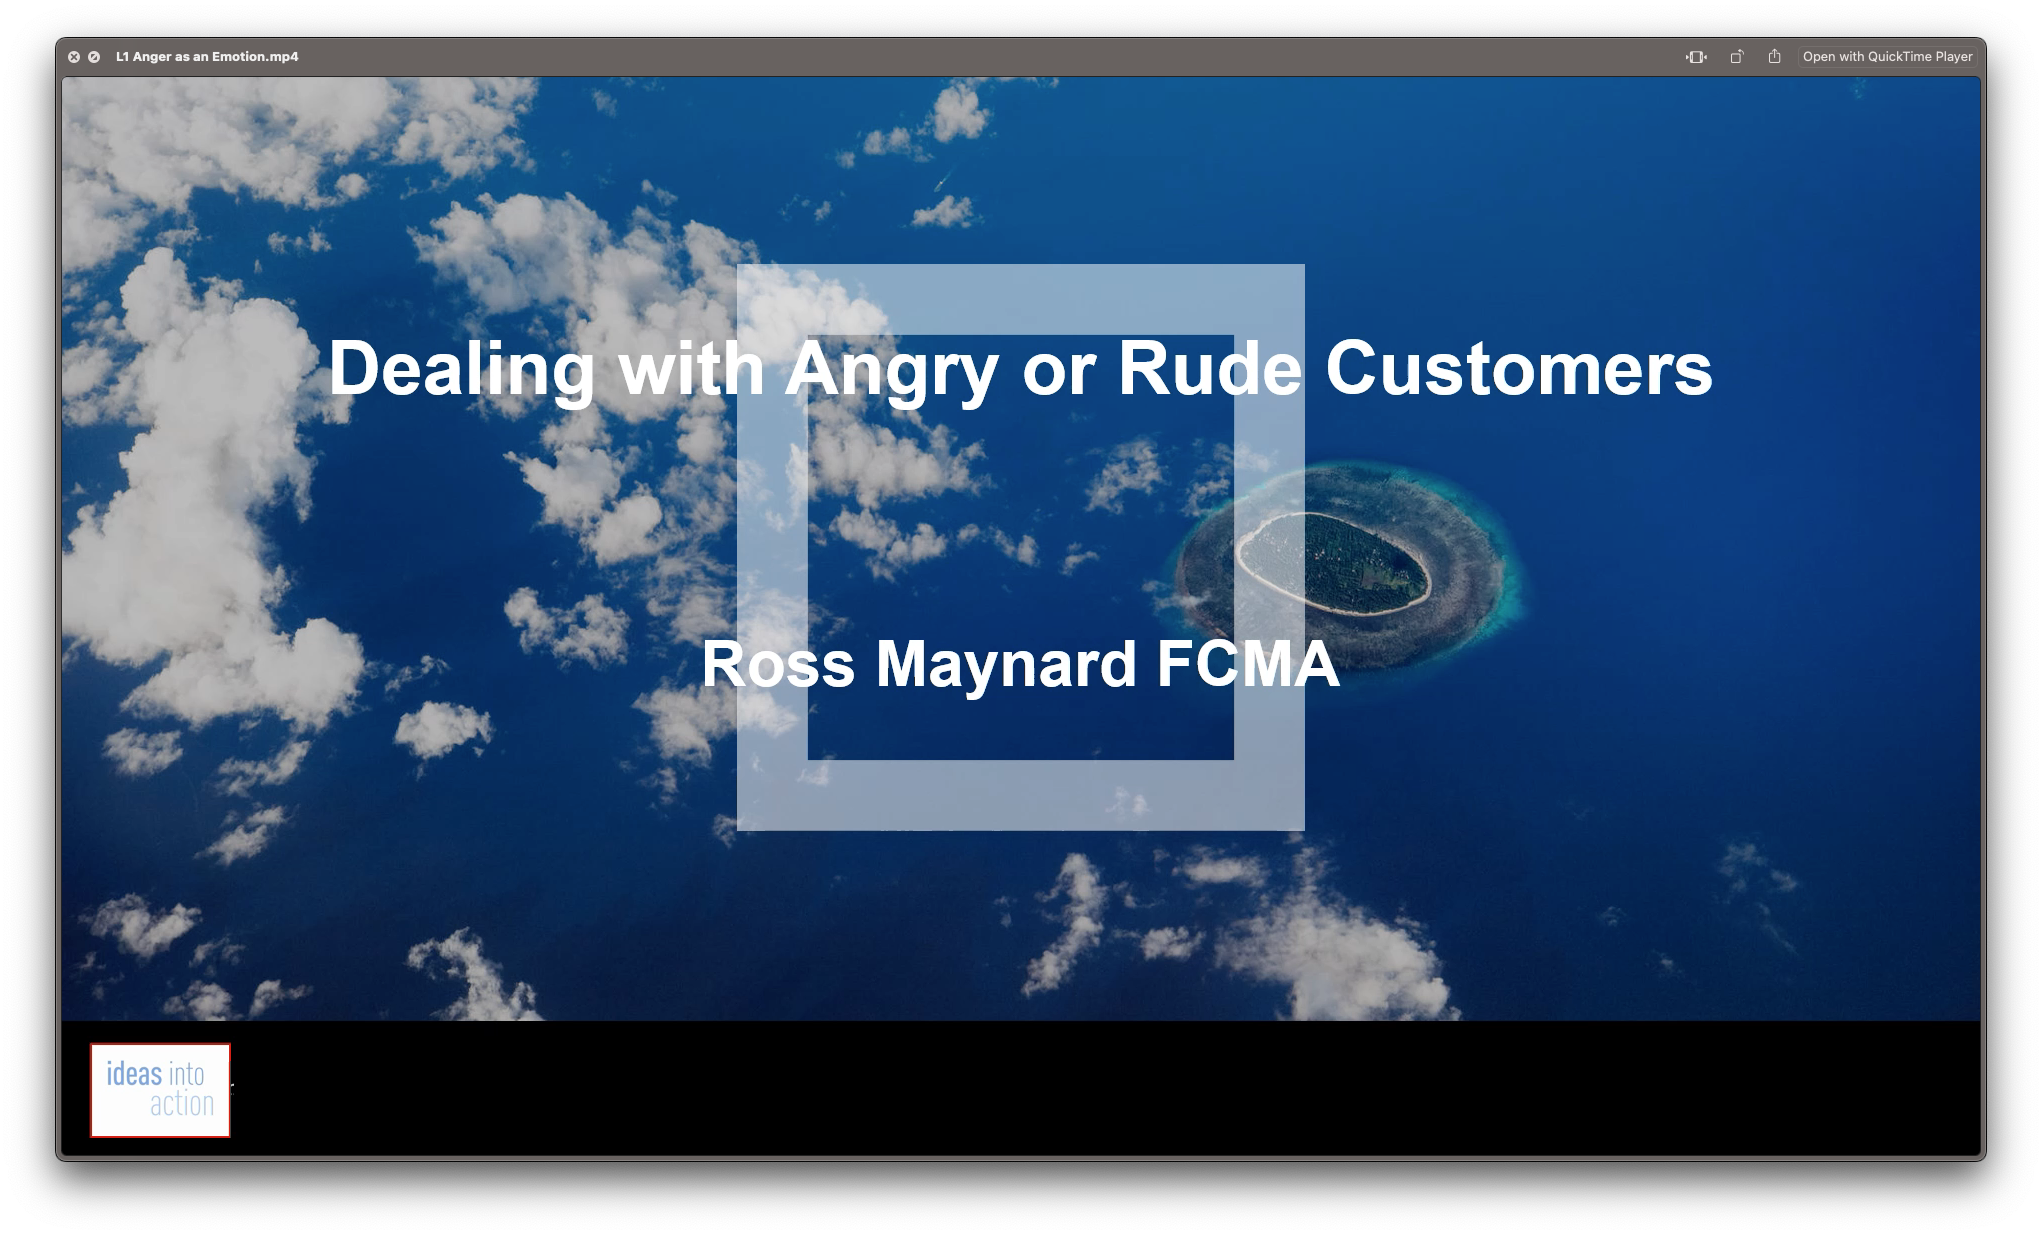 Dealing with Angry or Rude Customers